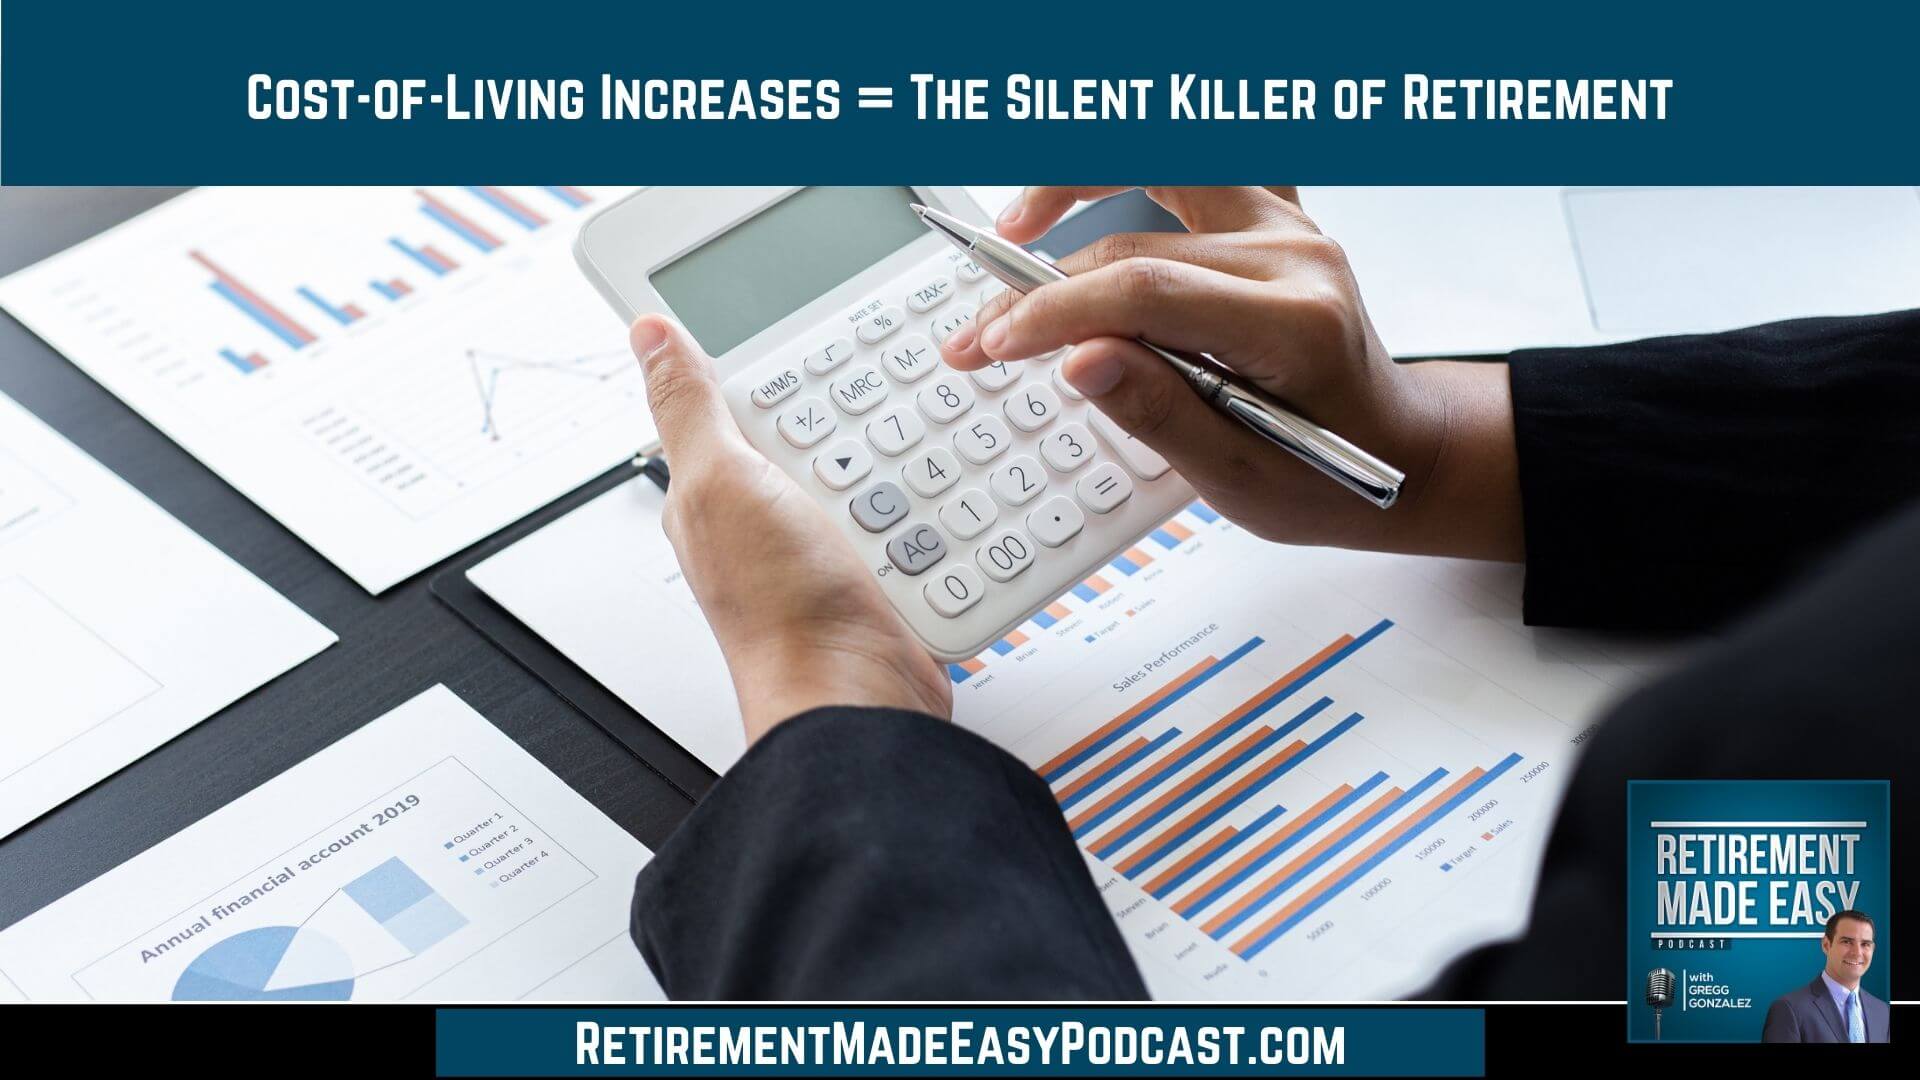 Cost-of-Living Increases = The Silent Killer of Retirement